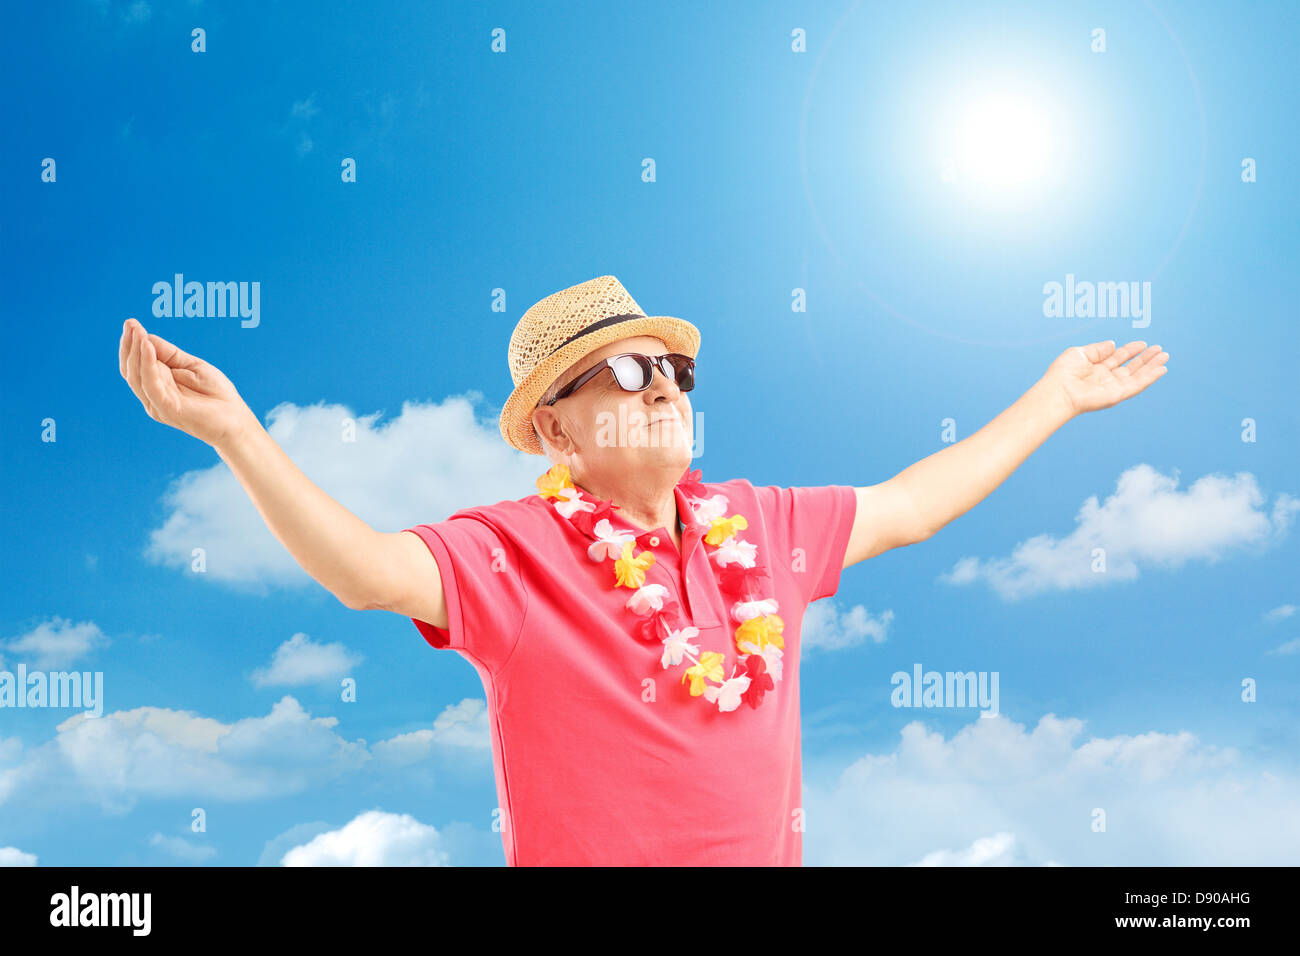 Happy mature man on a vacation spreading his arms on a sunny day Stock Photo